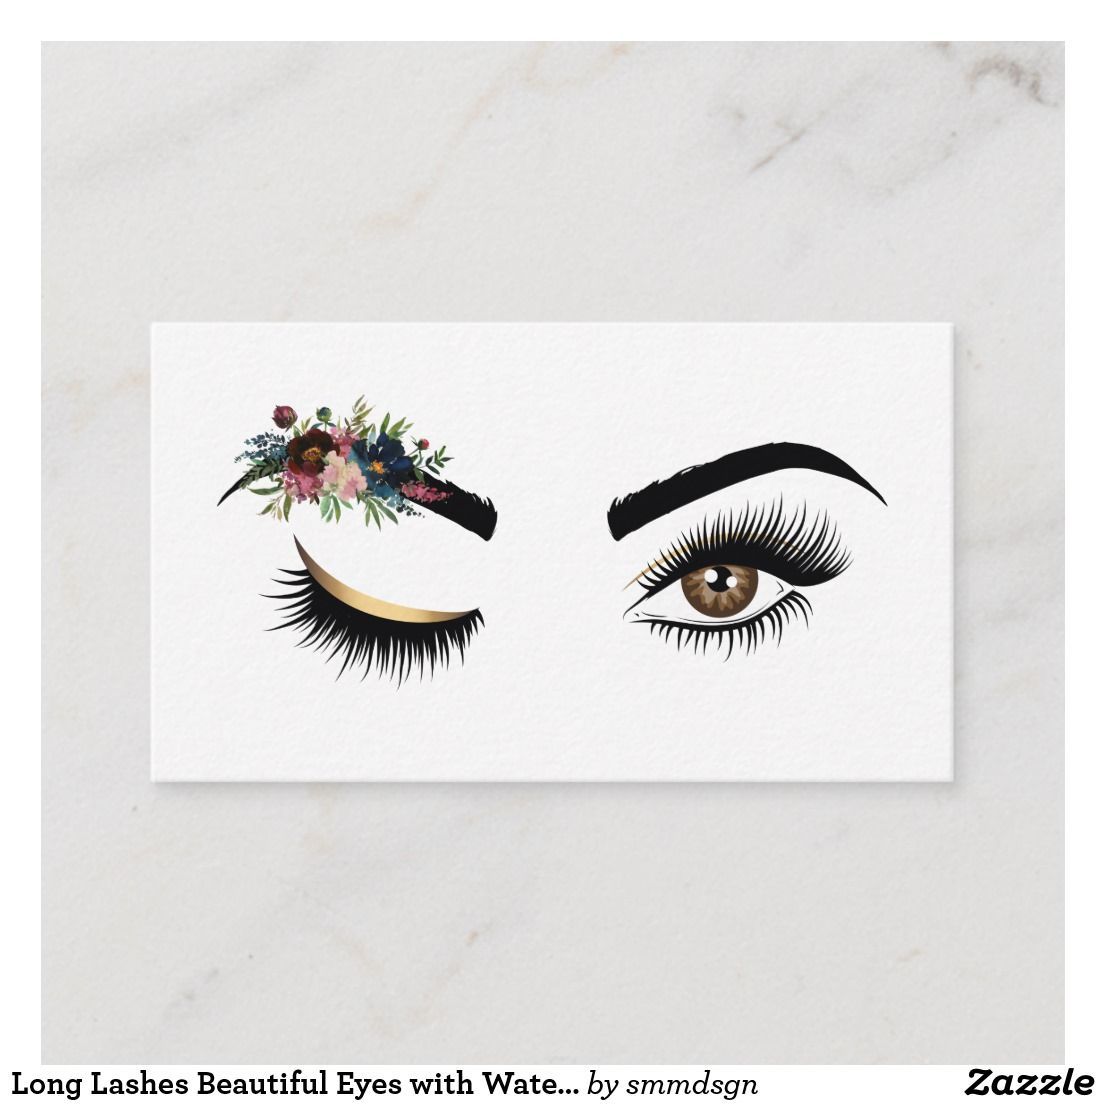 Long Lashes Beautiful Eyes with Watercolor Flowers Business Card | Zazzle.com - Long Lashes Beautiful Eyes with Watercolor Flowers Business Card | Zazzle.com -   17 beauty Eyes lashes ideas